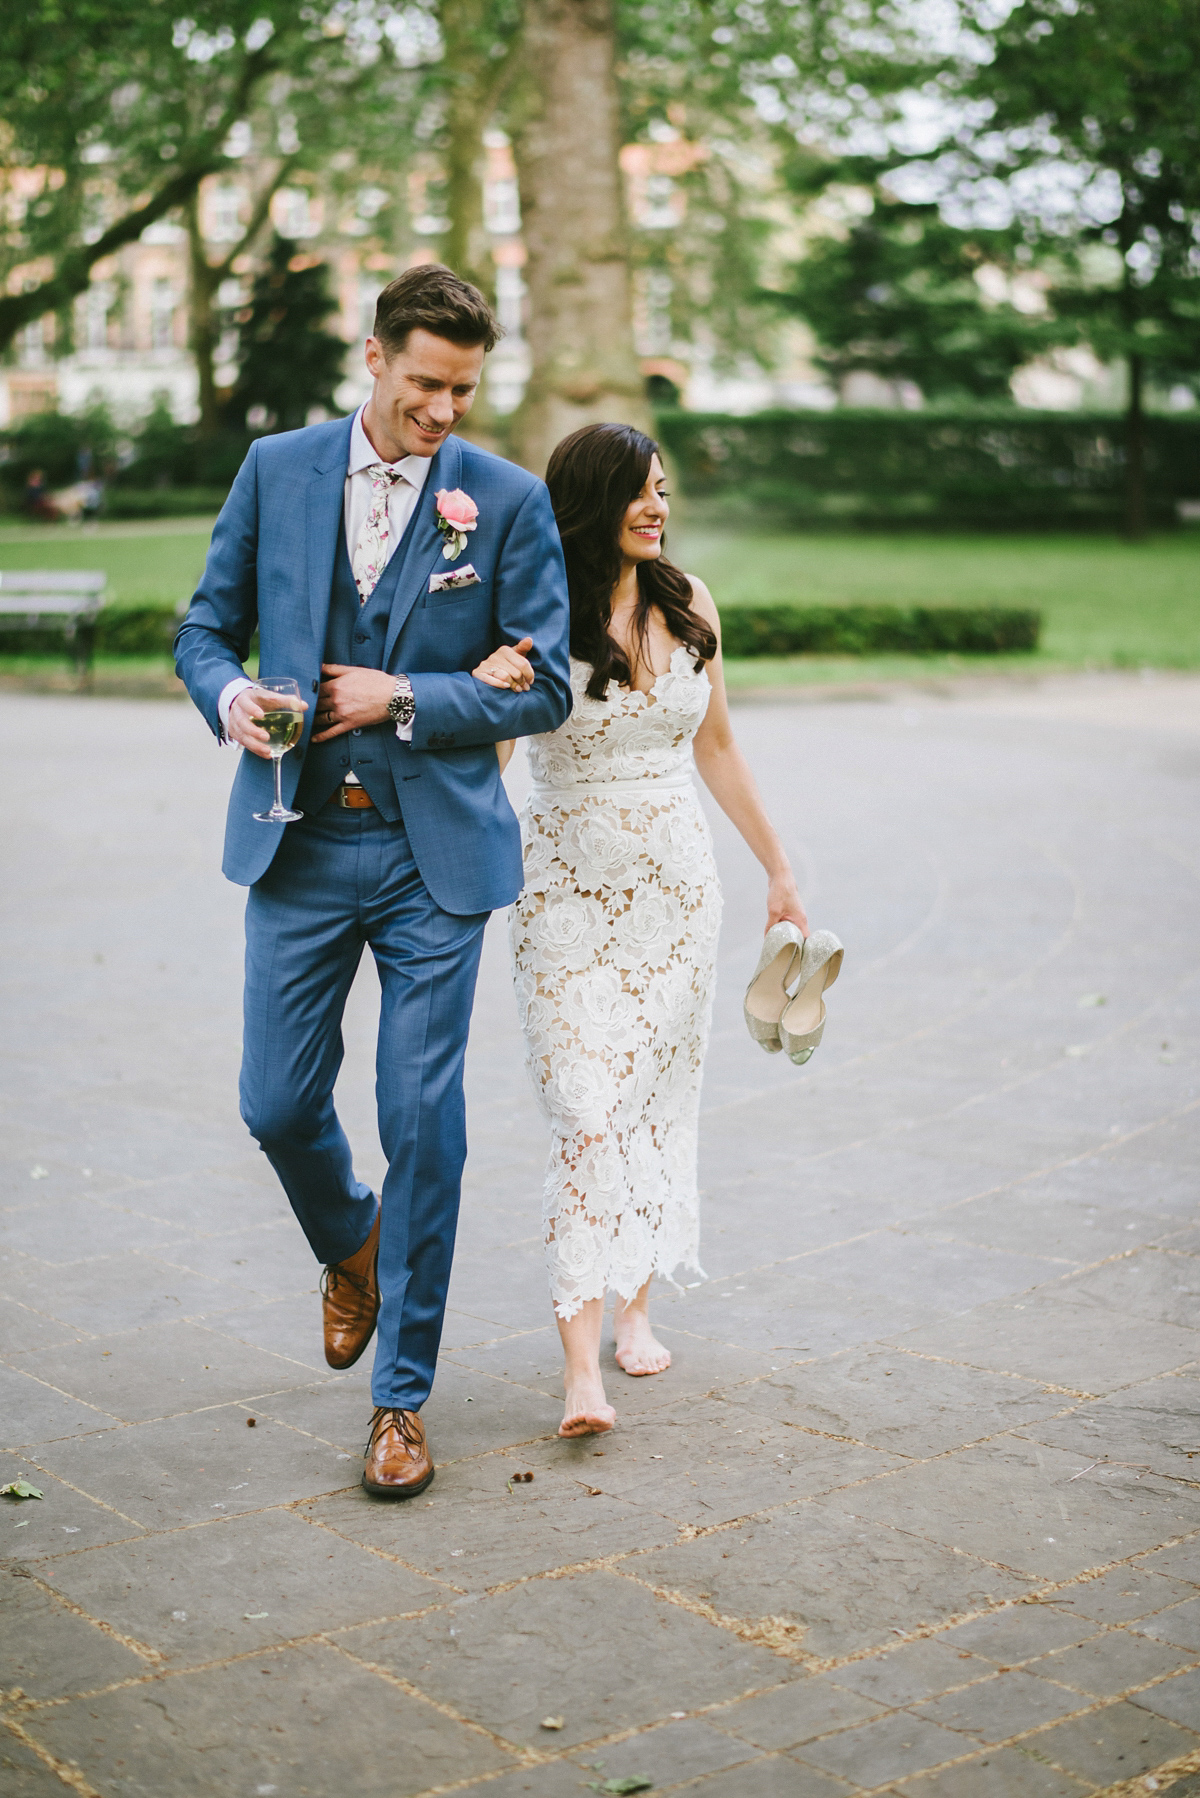 Theresa wore the Frida gown by Catherine Deane, via BHLDN, for her modern London wedding with no bridesmaids. Photography by Ed Godden.